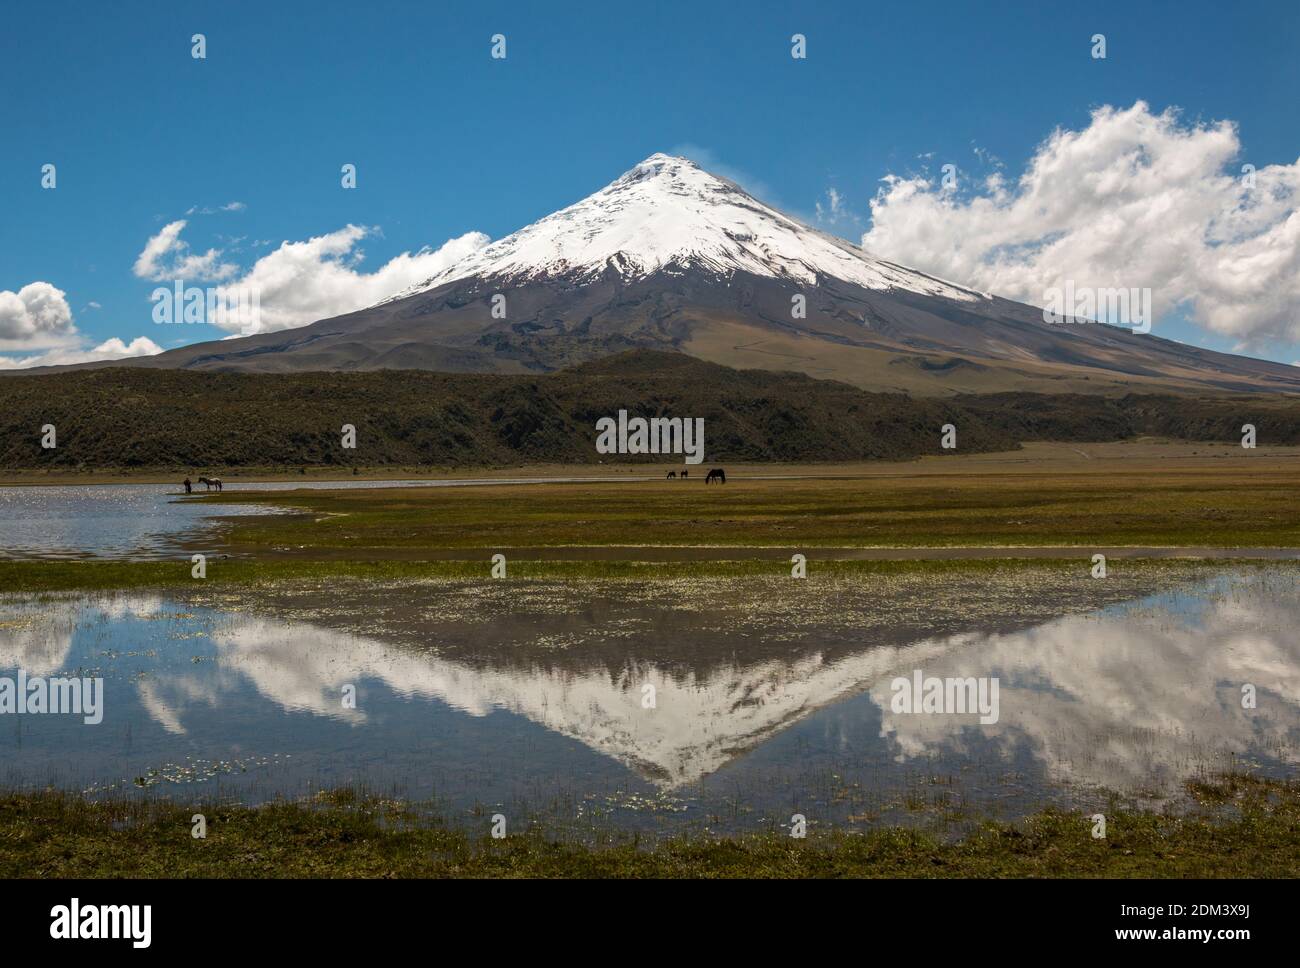 The snowcapped Cotopaxi Volcano reflected in a lake  (Laguna Limpiopungo) with wild horses. Cotopaxi National Park in the Ecuadorian Andes. Stock Photo